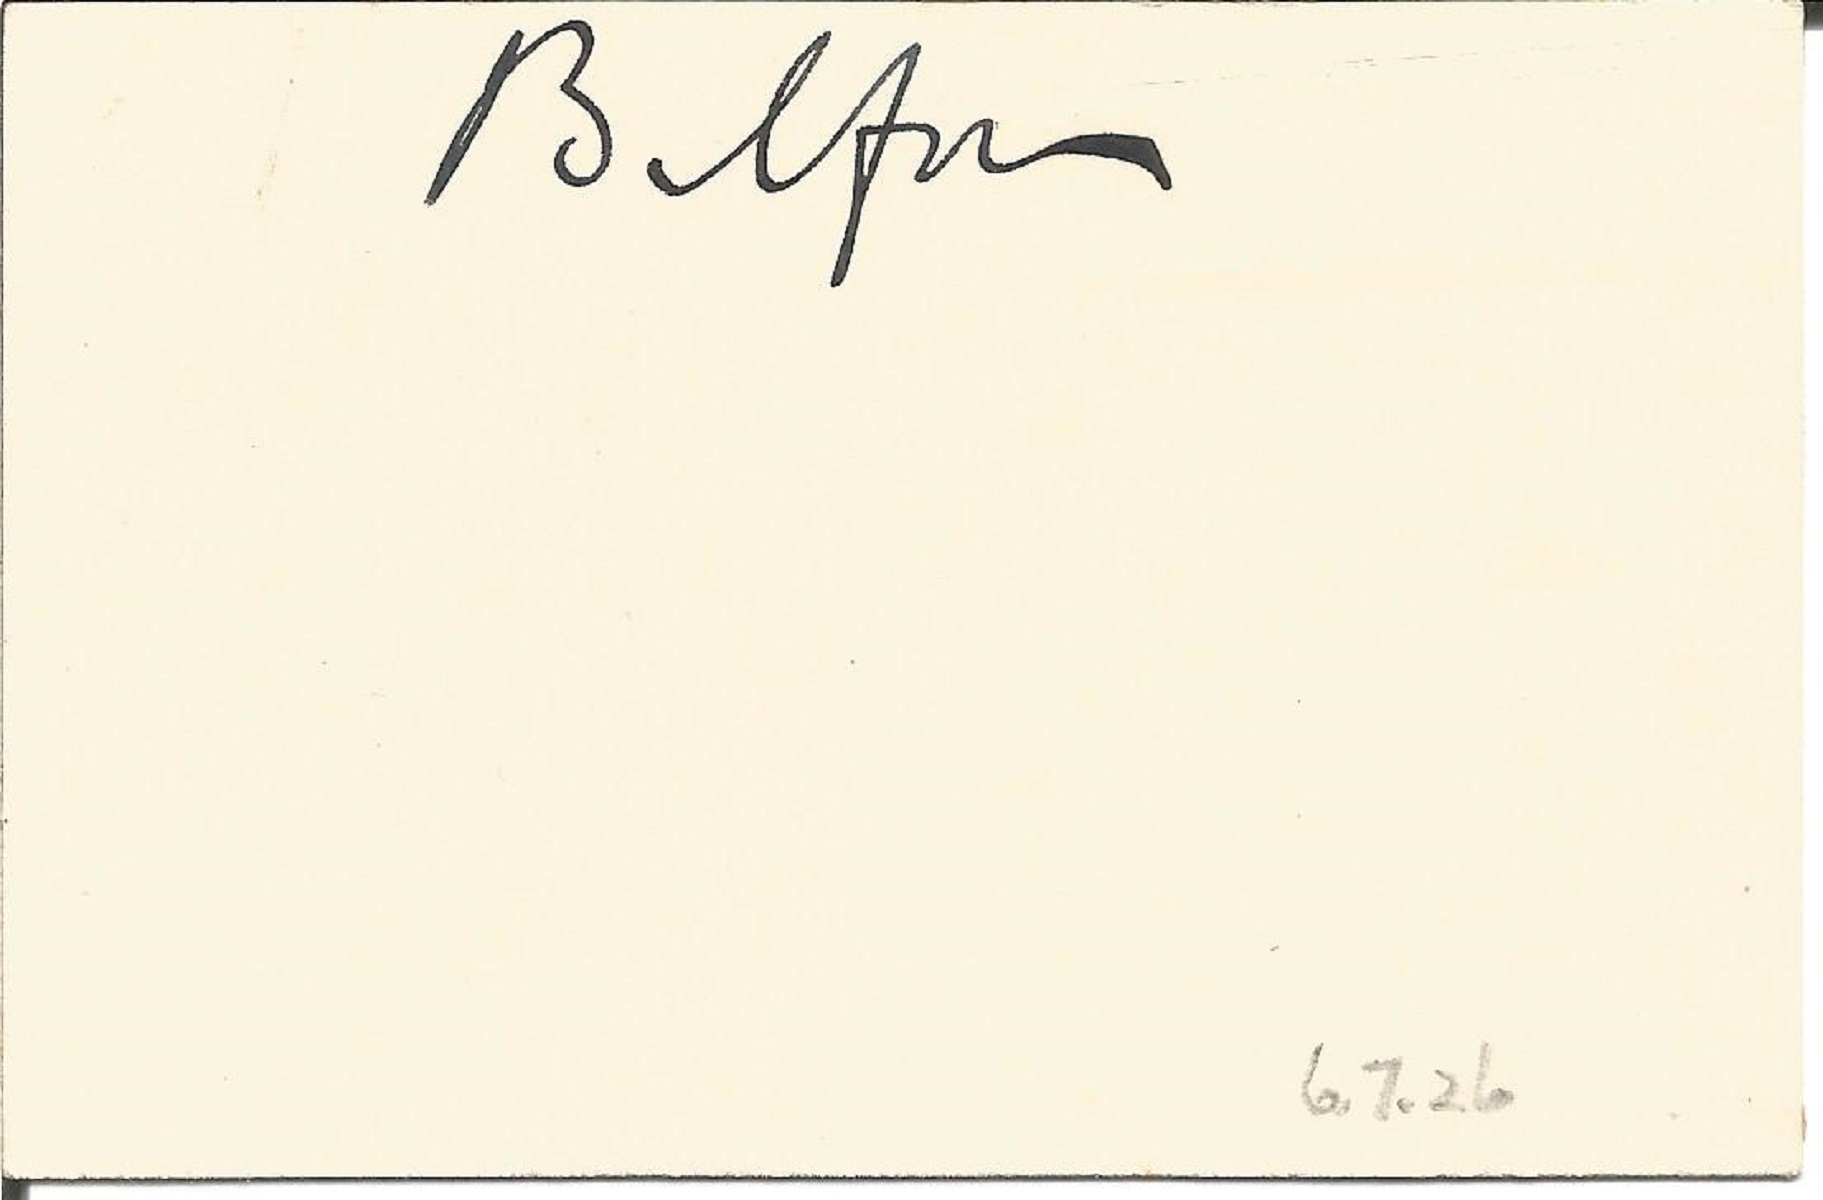 Lord Balfour signed white card. British Conservative statesman who served as Prime Minister of the